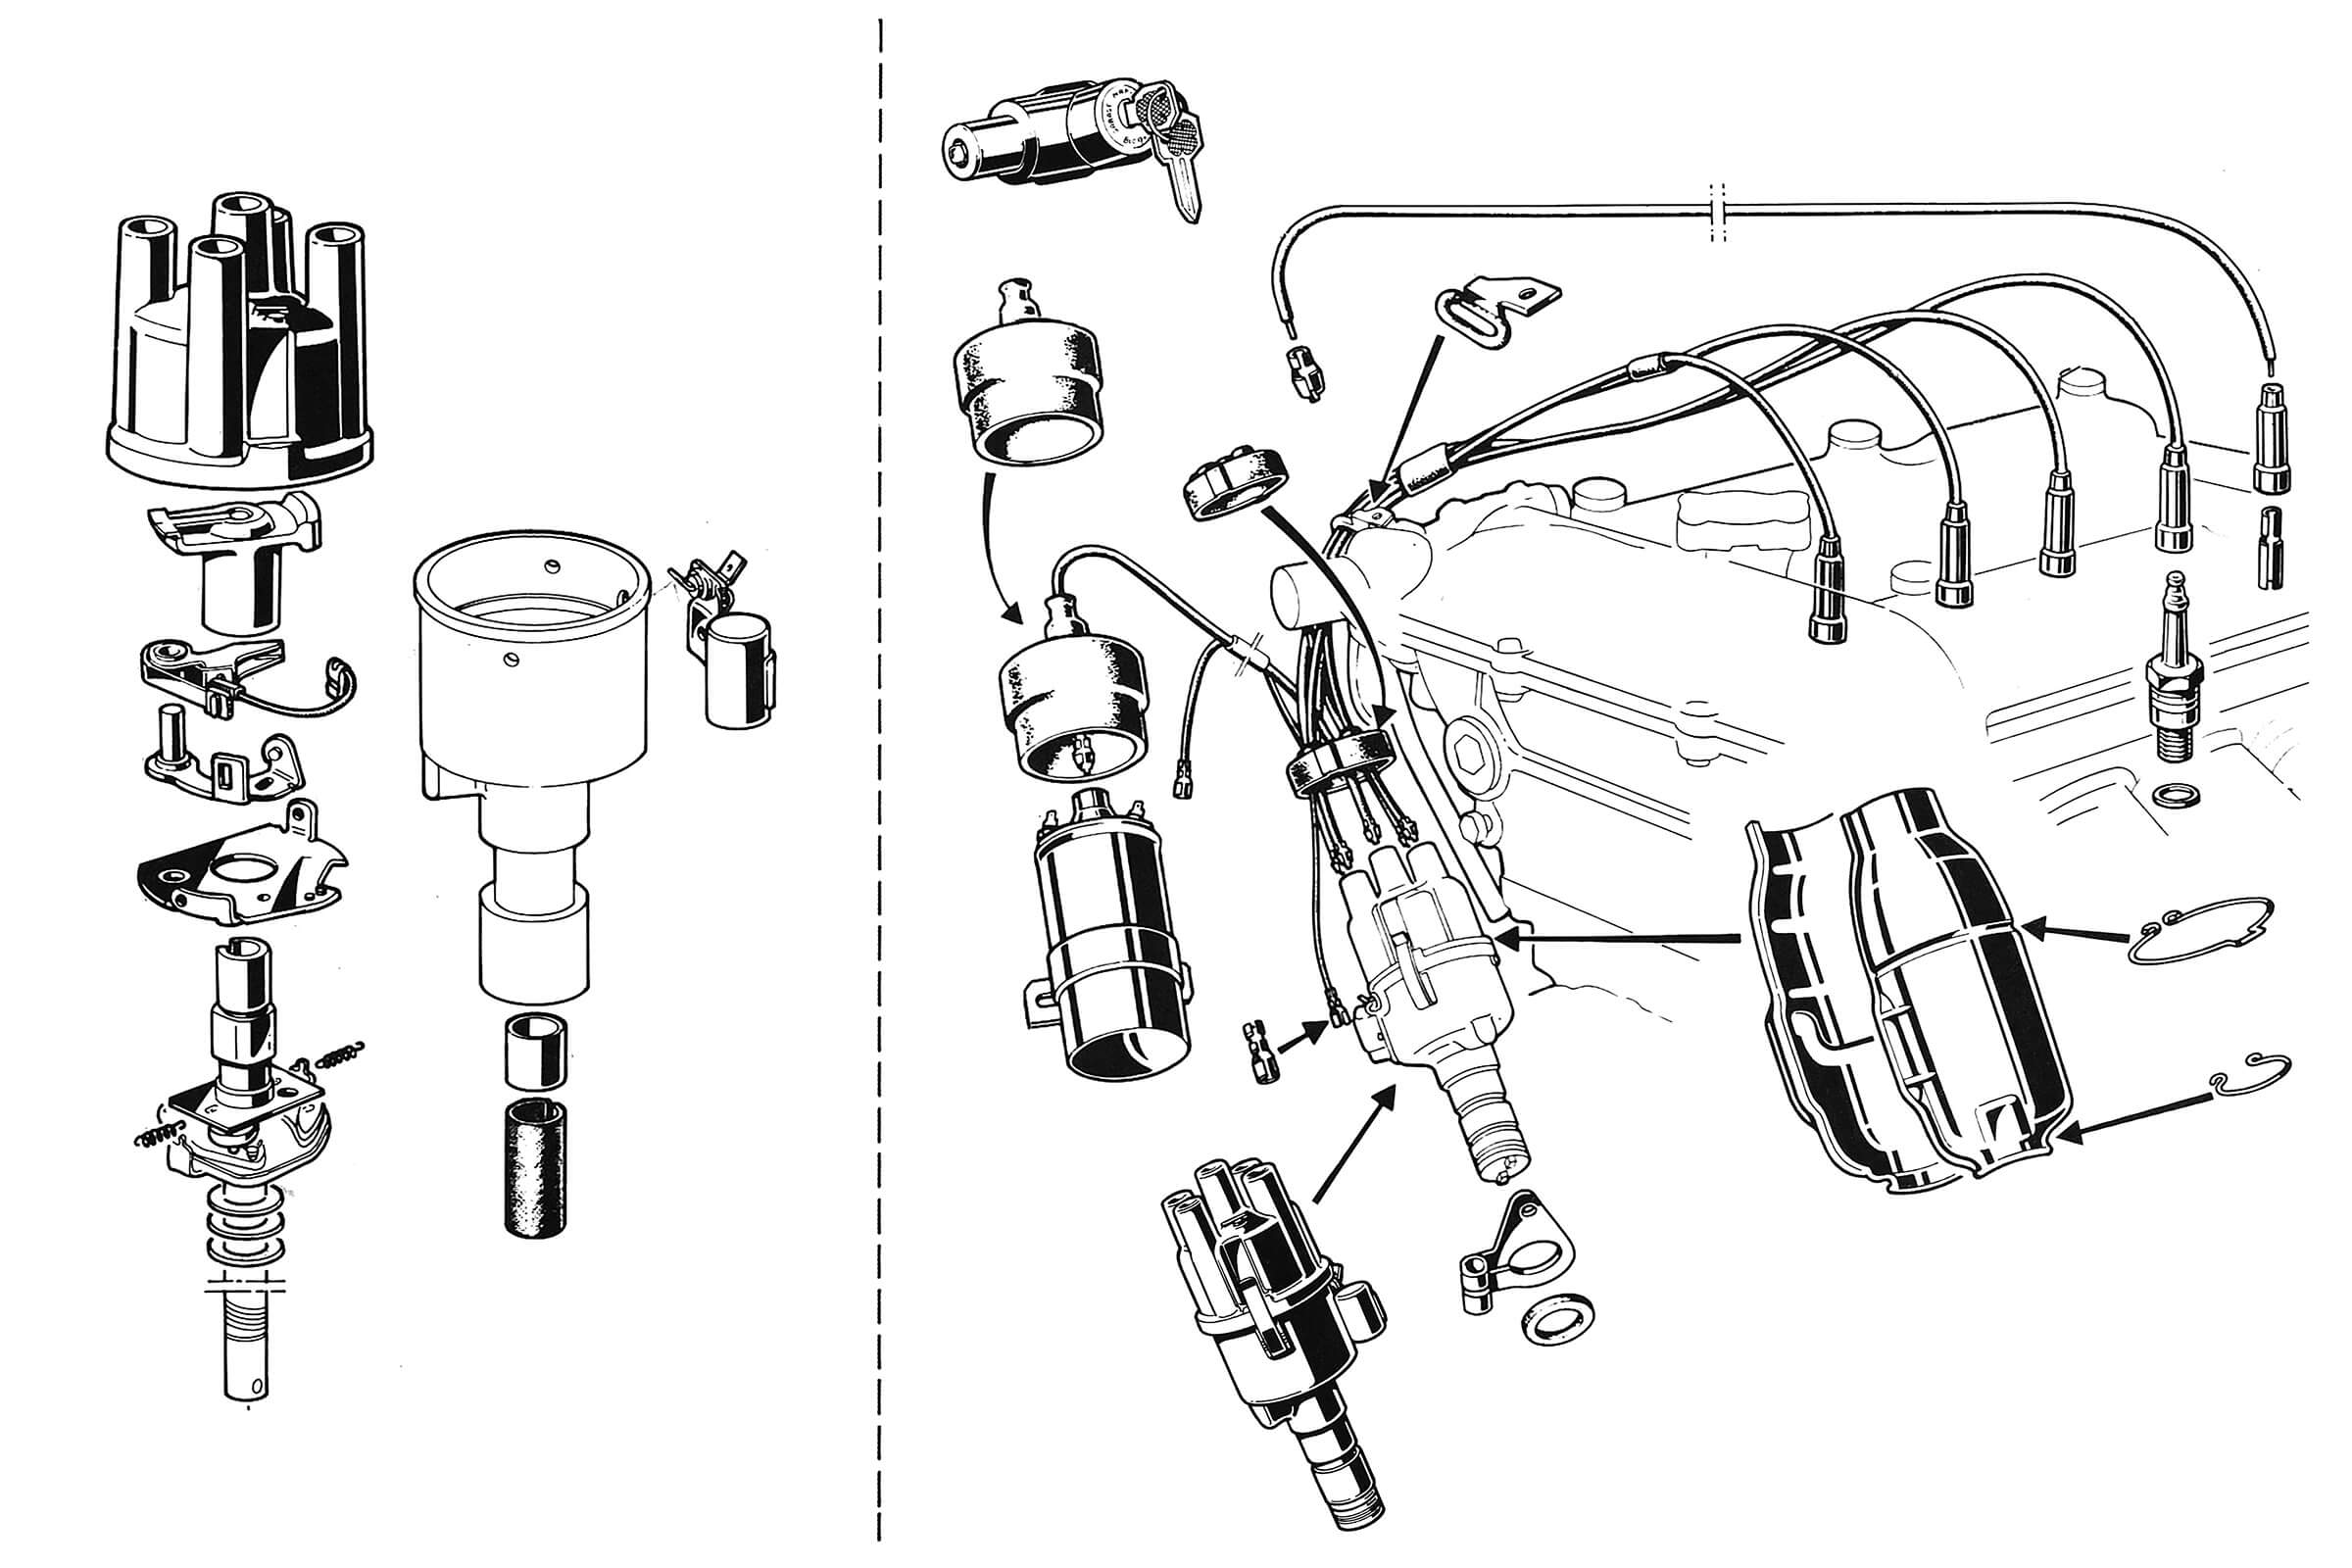 Ignition | Electrical | 105/115 Series (Shared Parts) | Alfa Romeo Parts Diagram | Alfaholics